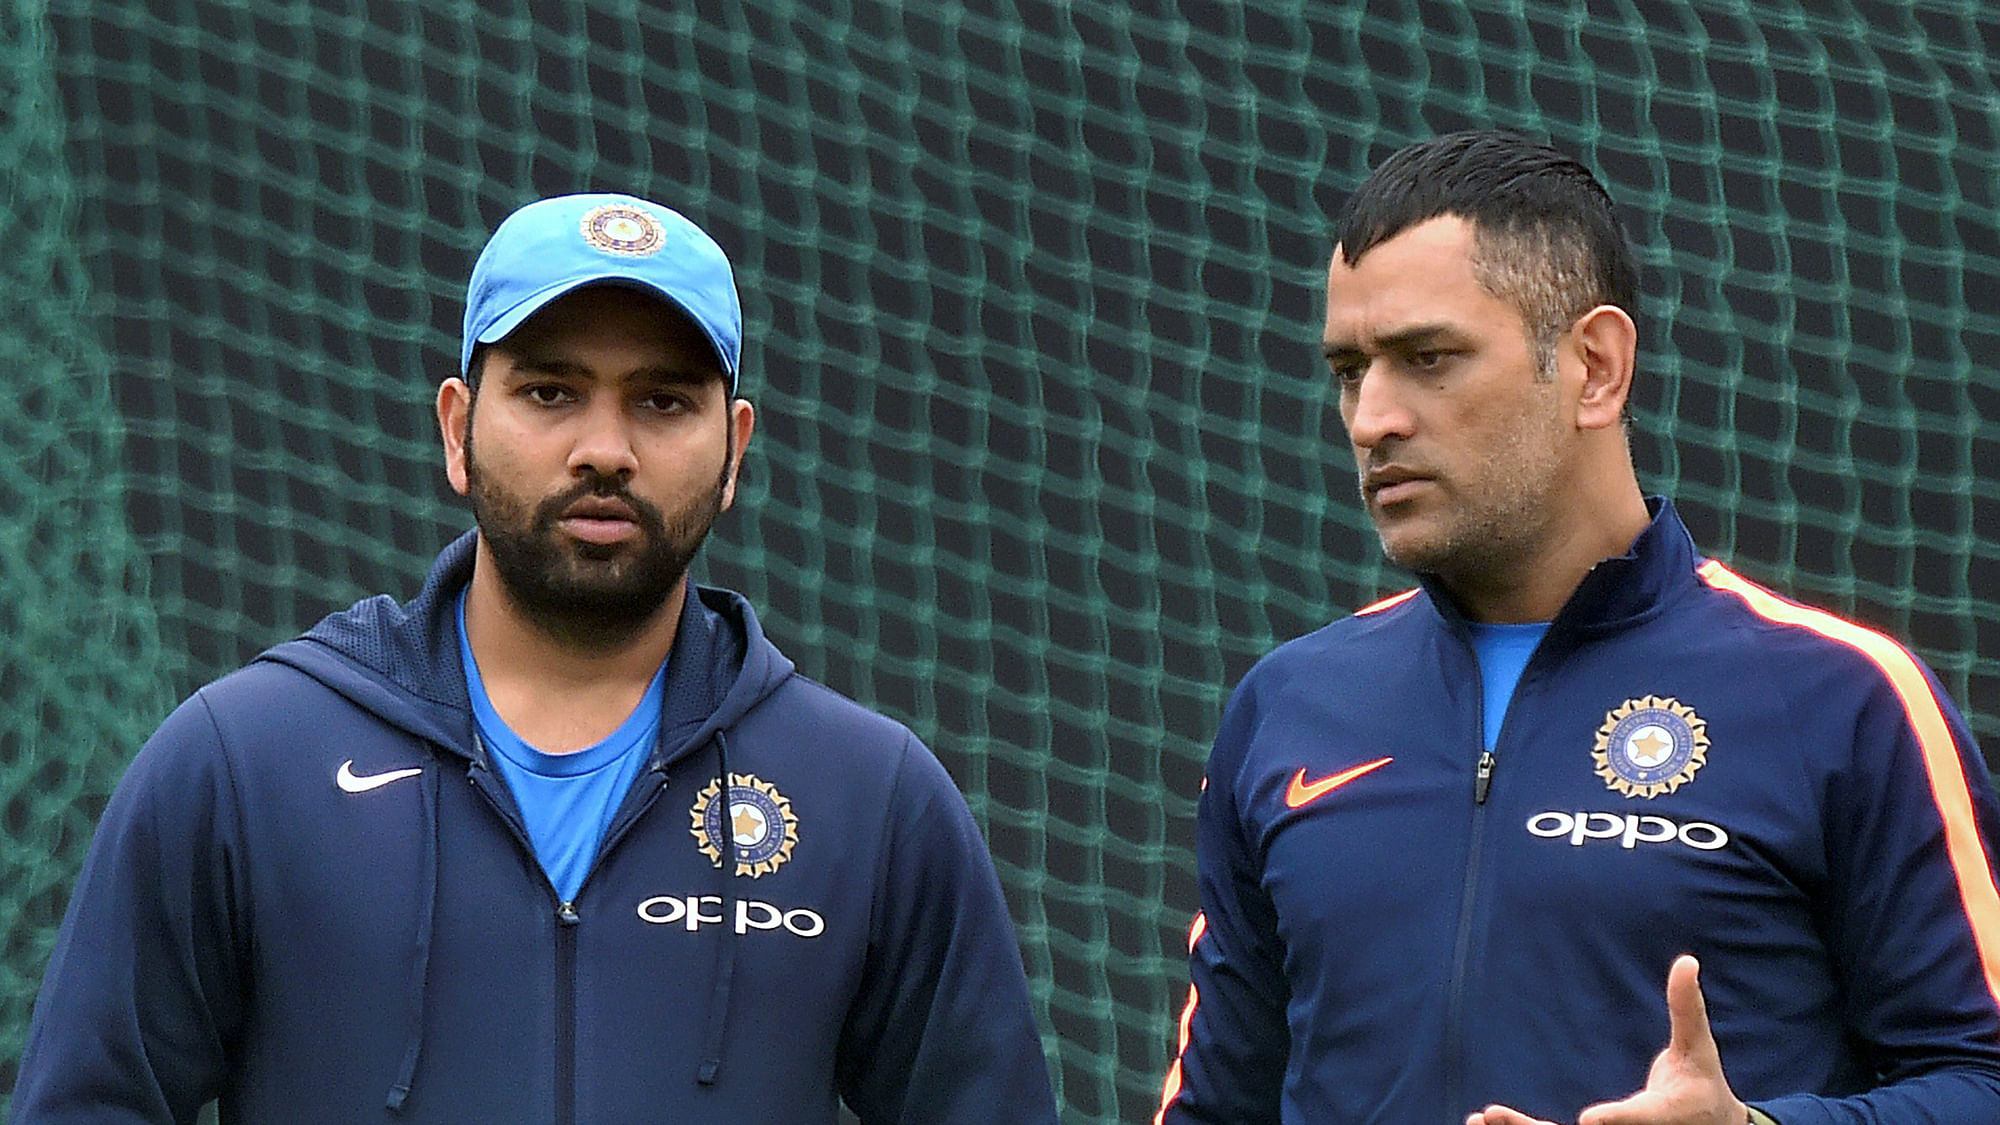 Rohit Sharma will be captaining India for the rest of the New Zealand tour with Virat Kohli sitting out to rest.